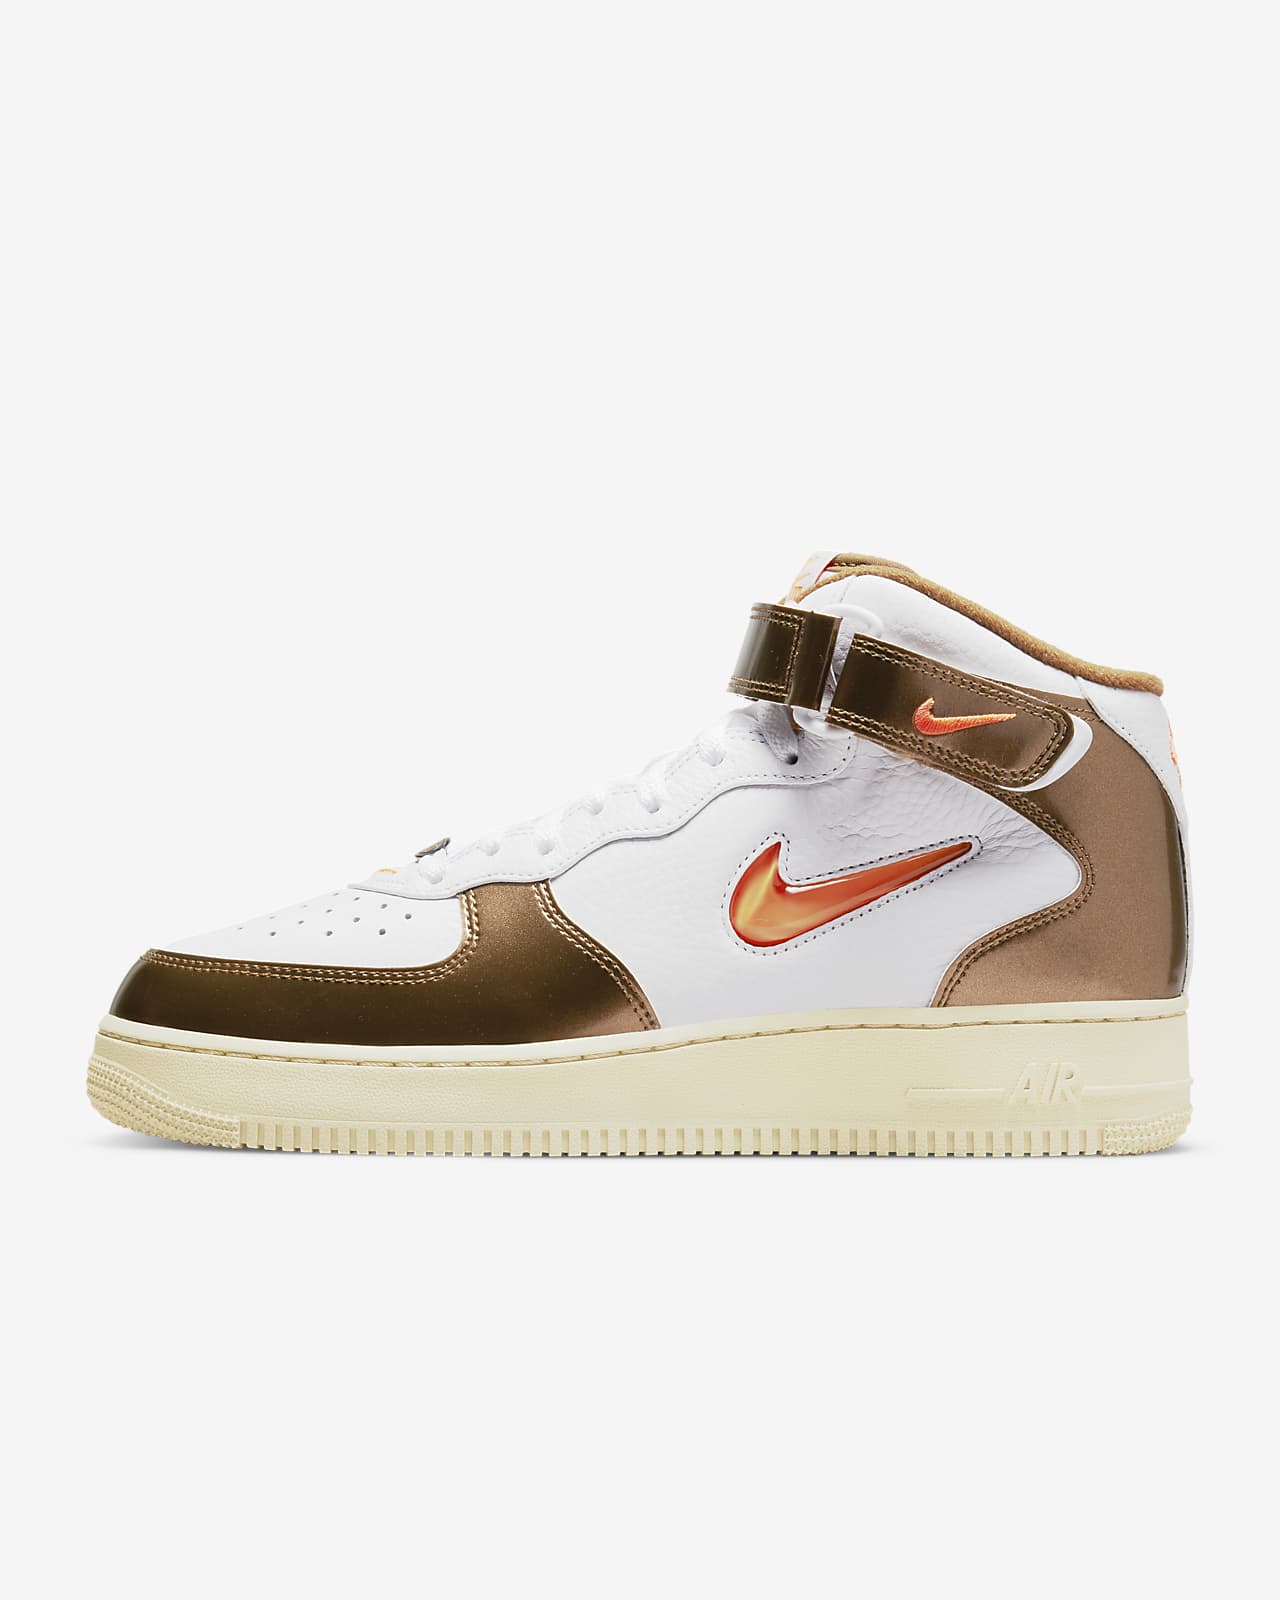 Omgaan Symposium Actuator Nike Air Force 1 Mid QS Men's Shoes. Nike RO